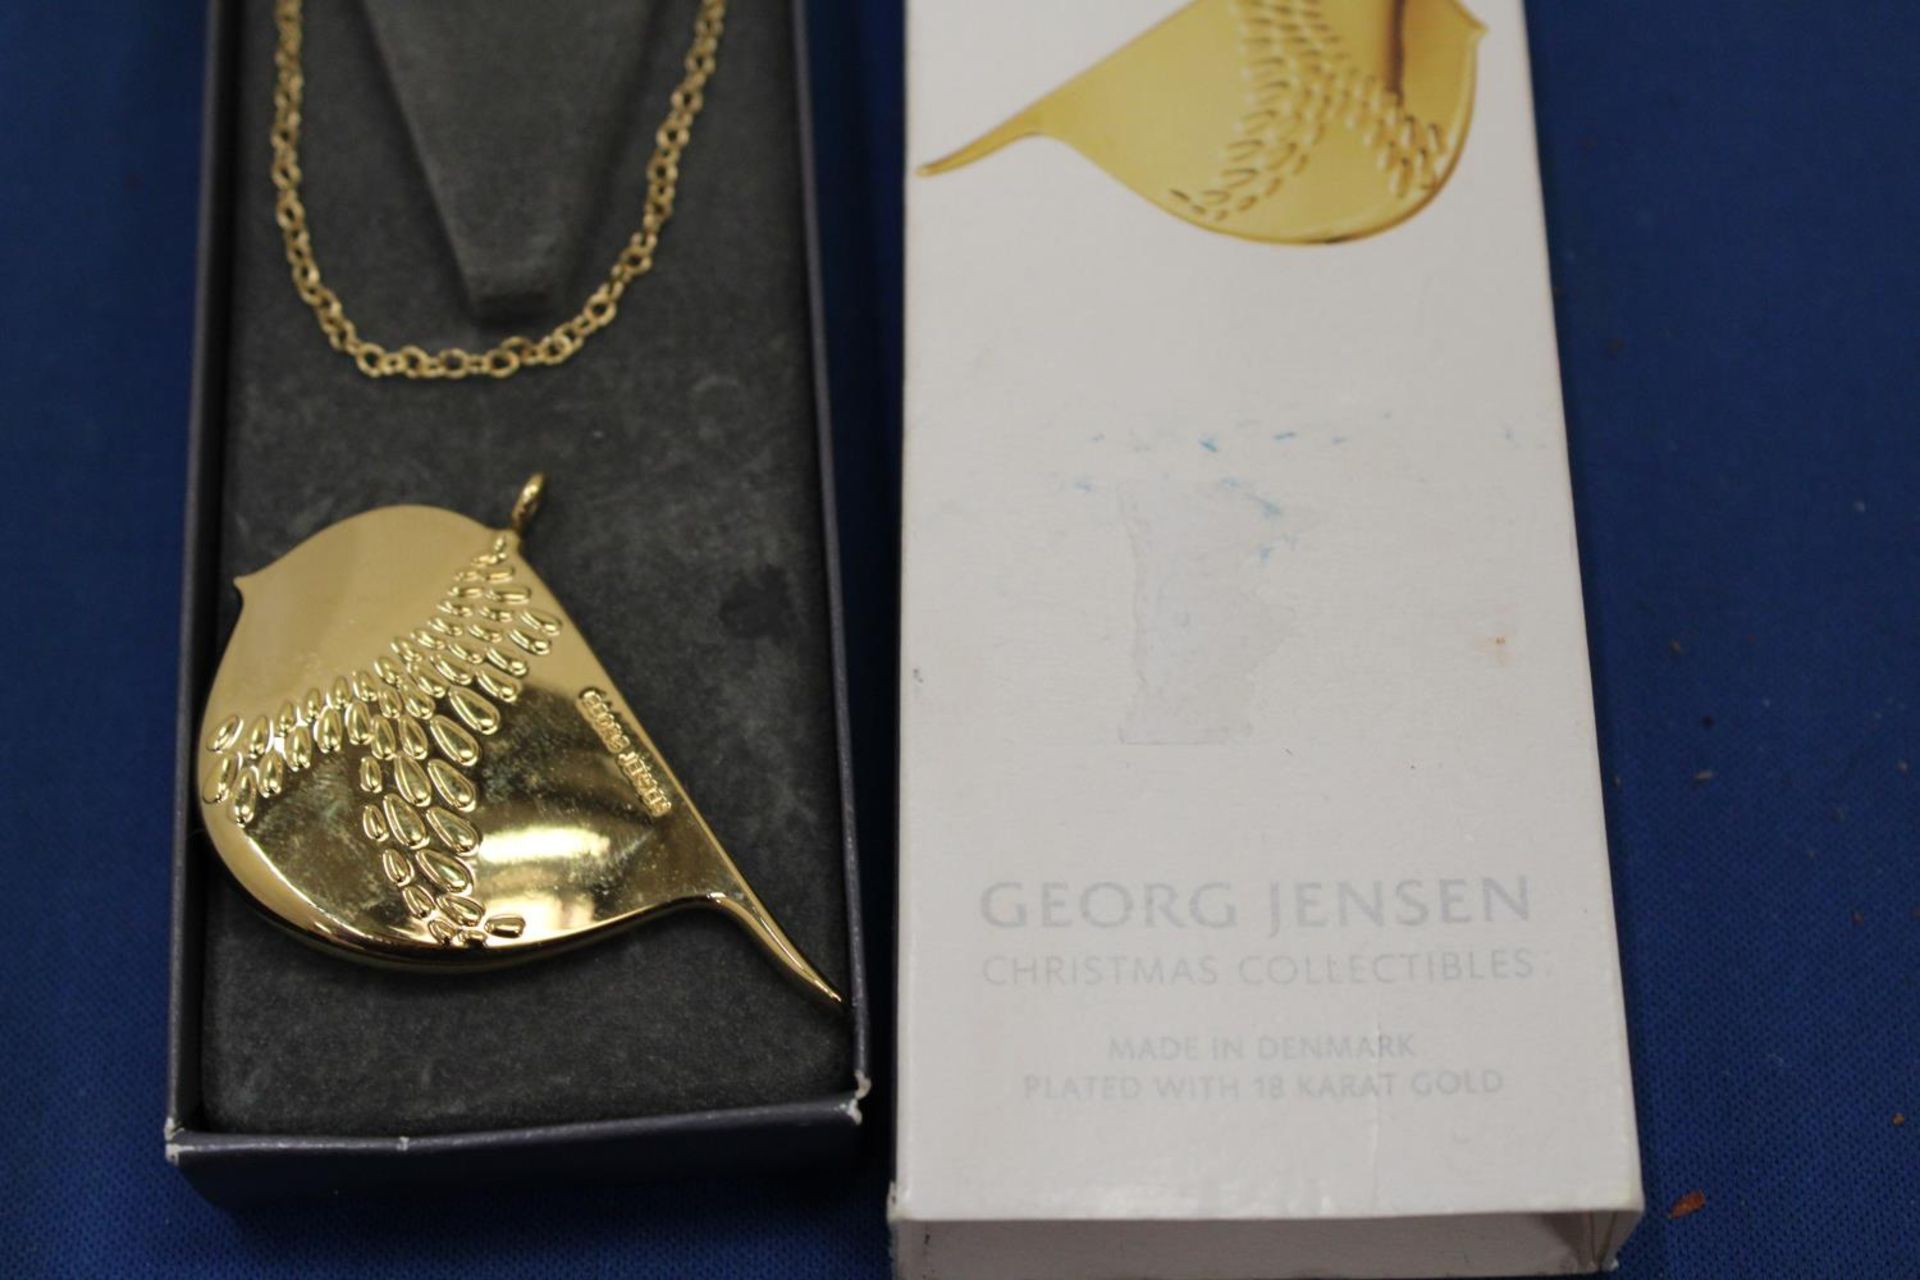 A GEORG JENSON CHRISTMAS COLLECTION 18 KARAT GOLD PLATED ROBIN IN ORIGINAL BOX - Image 2 of 3